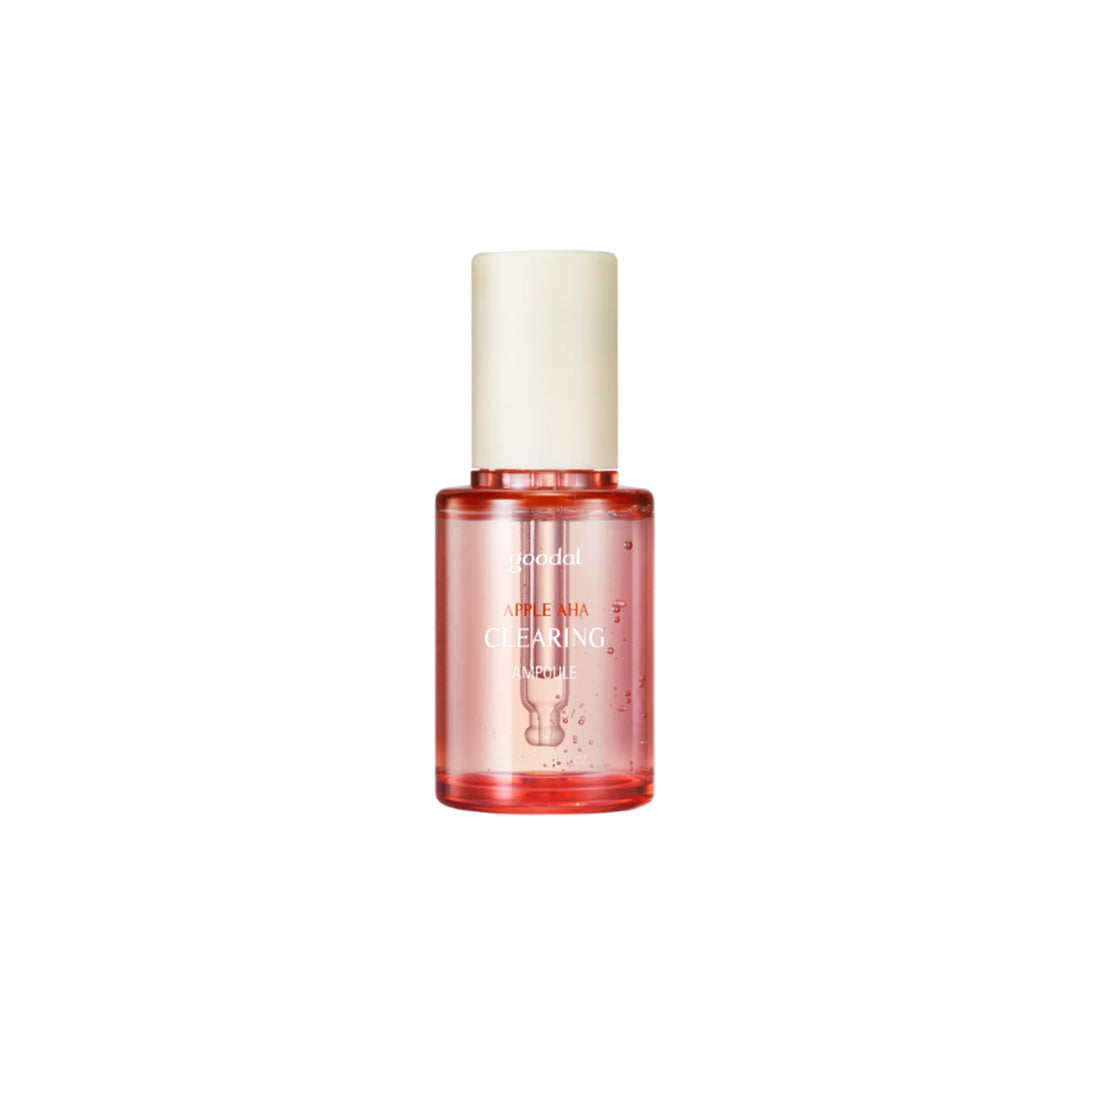 Goodal Apple Aha Clearing Ampoule